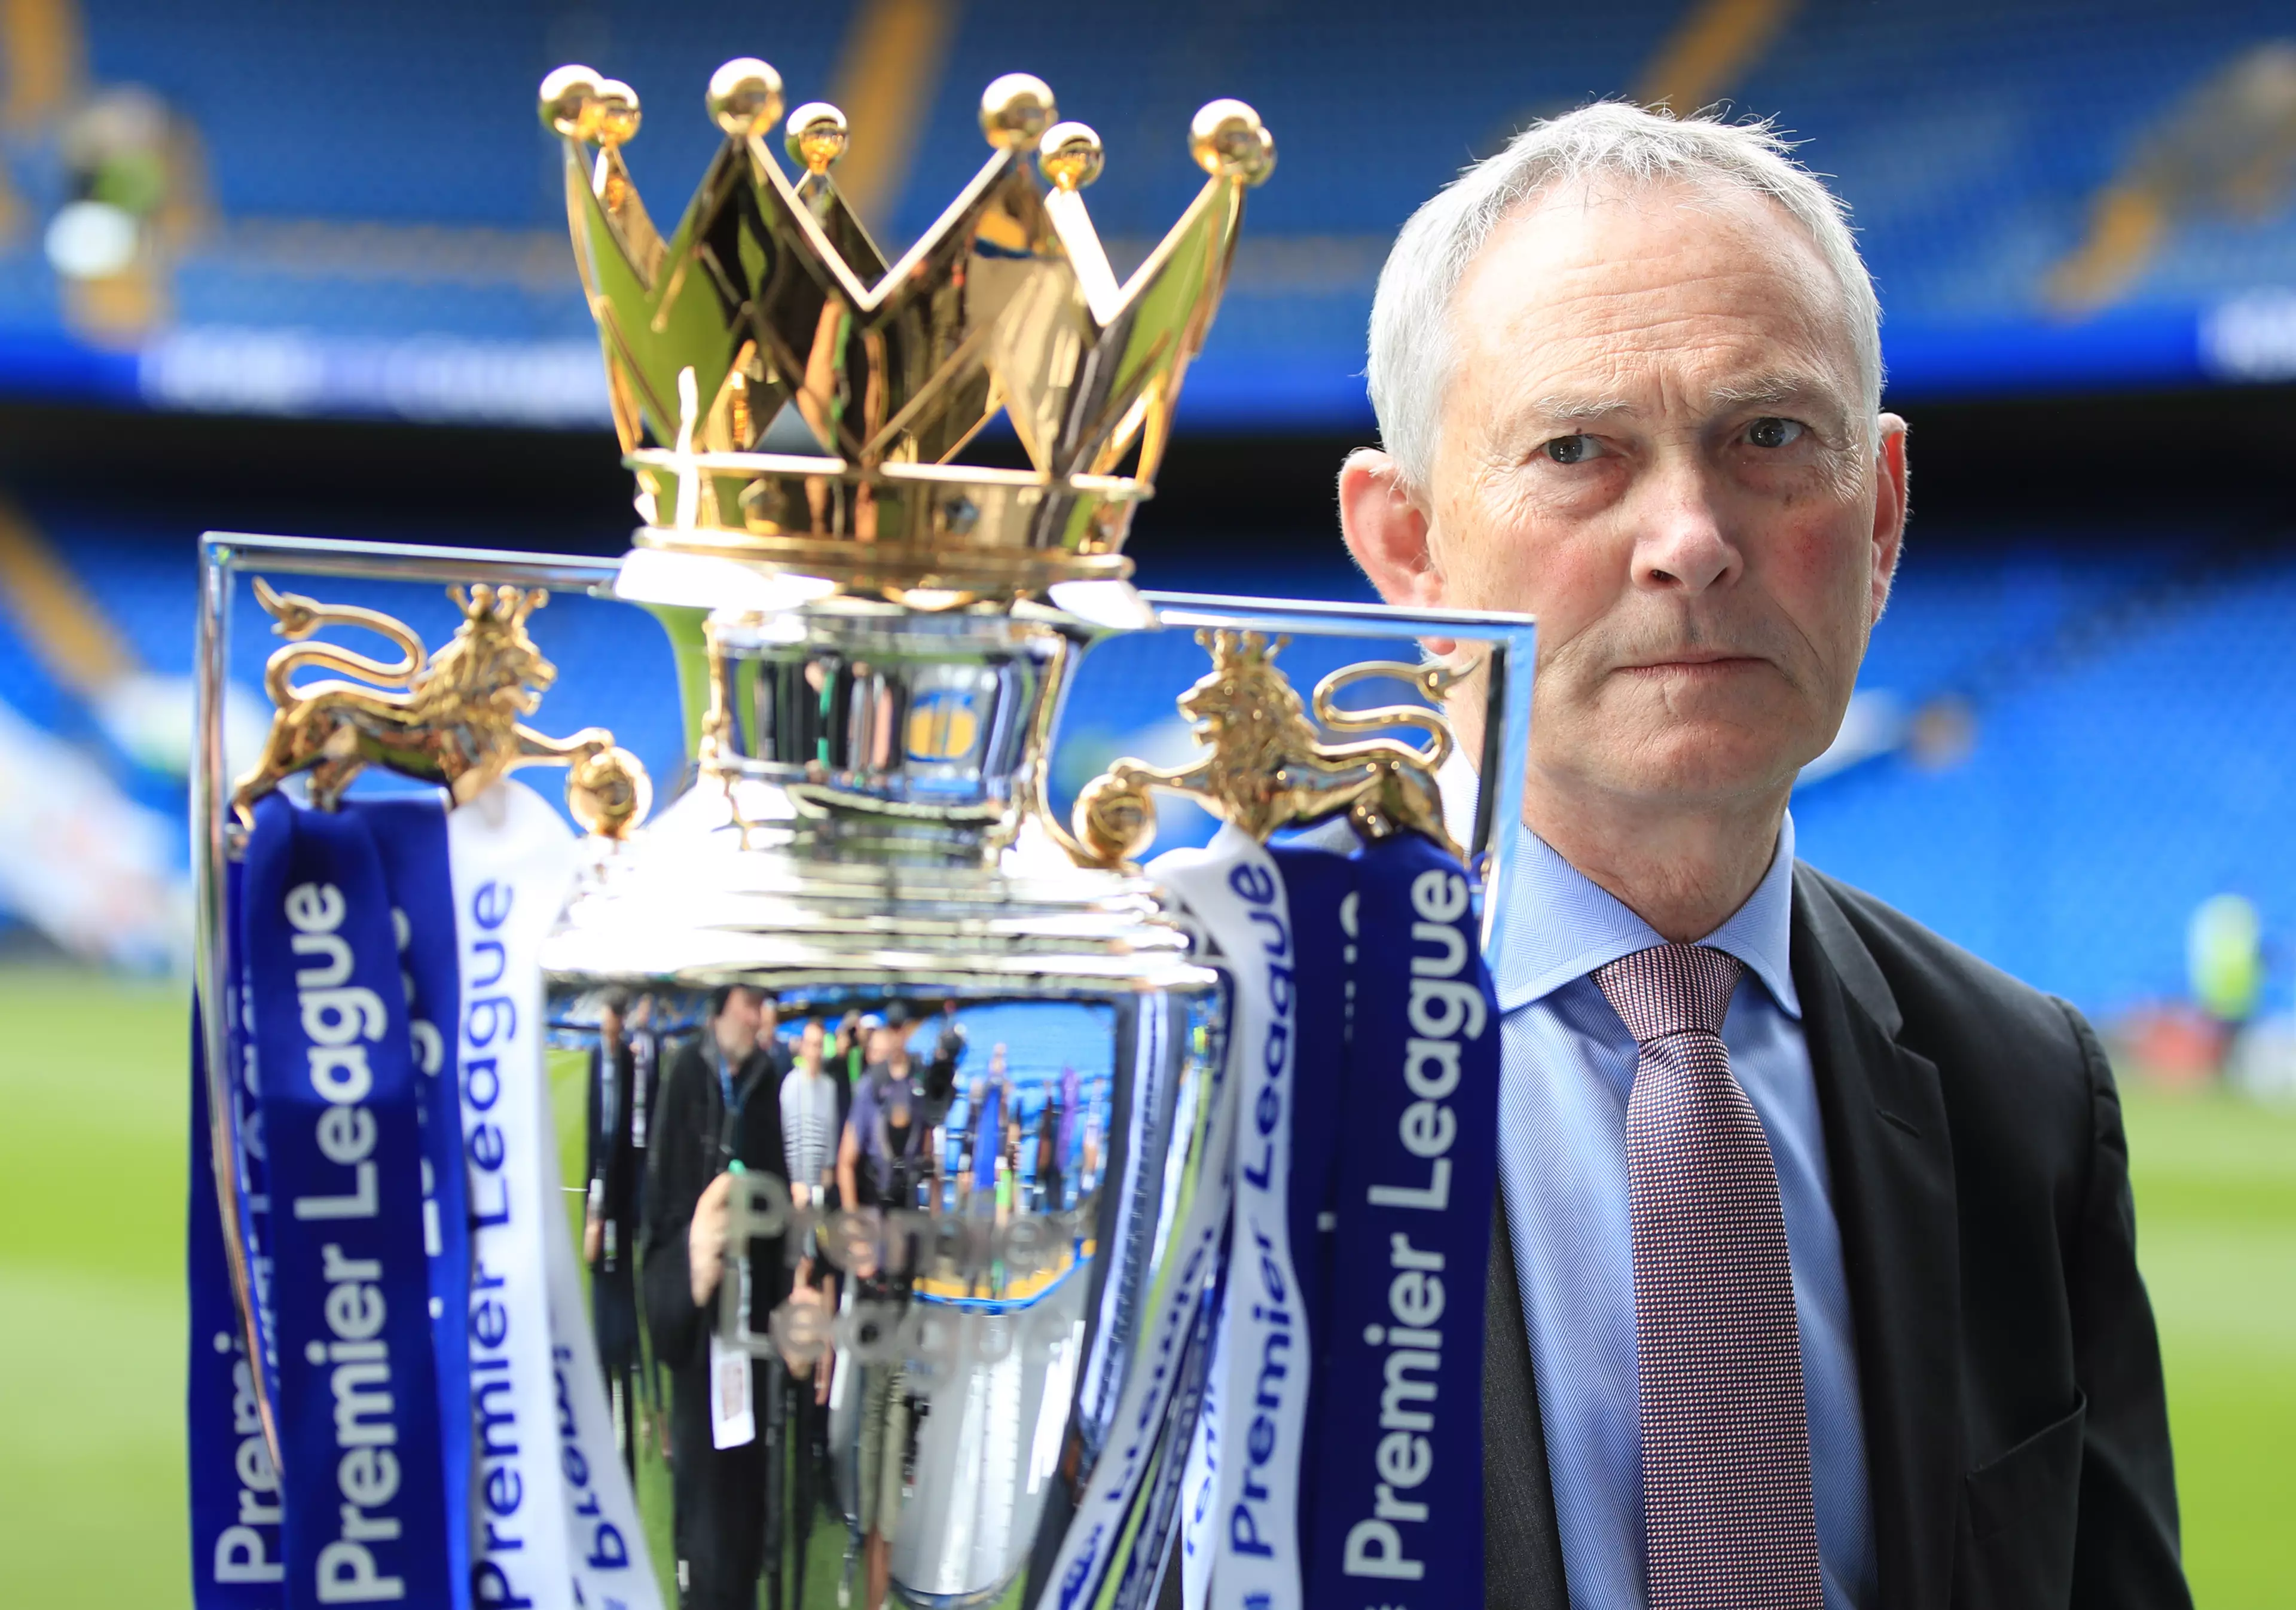 Scudamore with the Premier League trophy. Image: PA Images